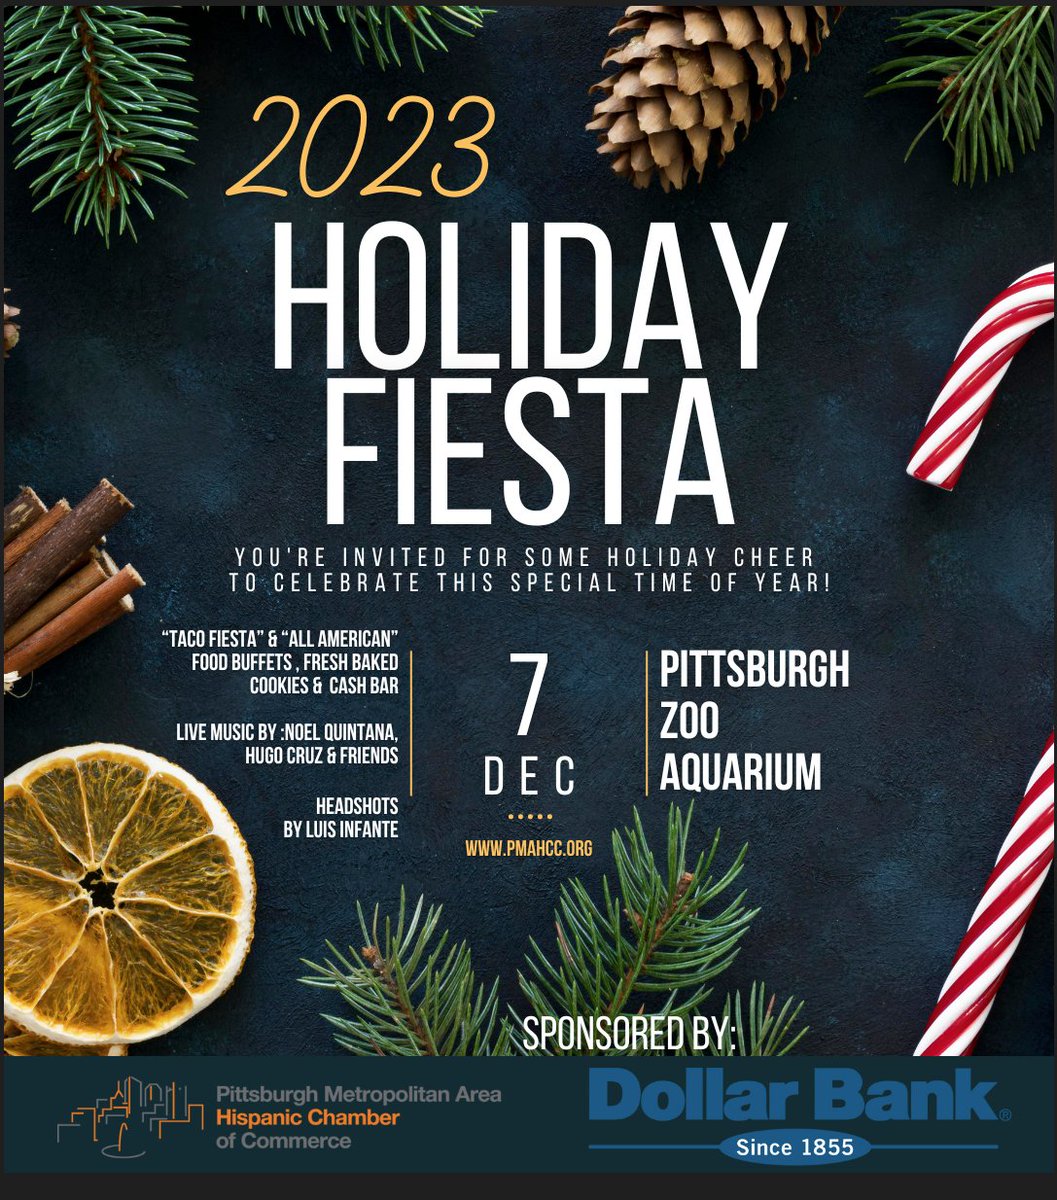 Please join us on Thursday, Dec. 7th, as we celebrate with our community partner, the Pittsburgh Metropolitan Area Hispanic Chamber of Commerce, from 6-10 PM at the @PghZoo. Get your tickets at ow.ly/mr2q50QfiHb